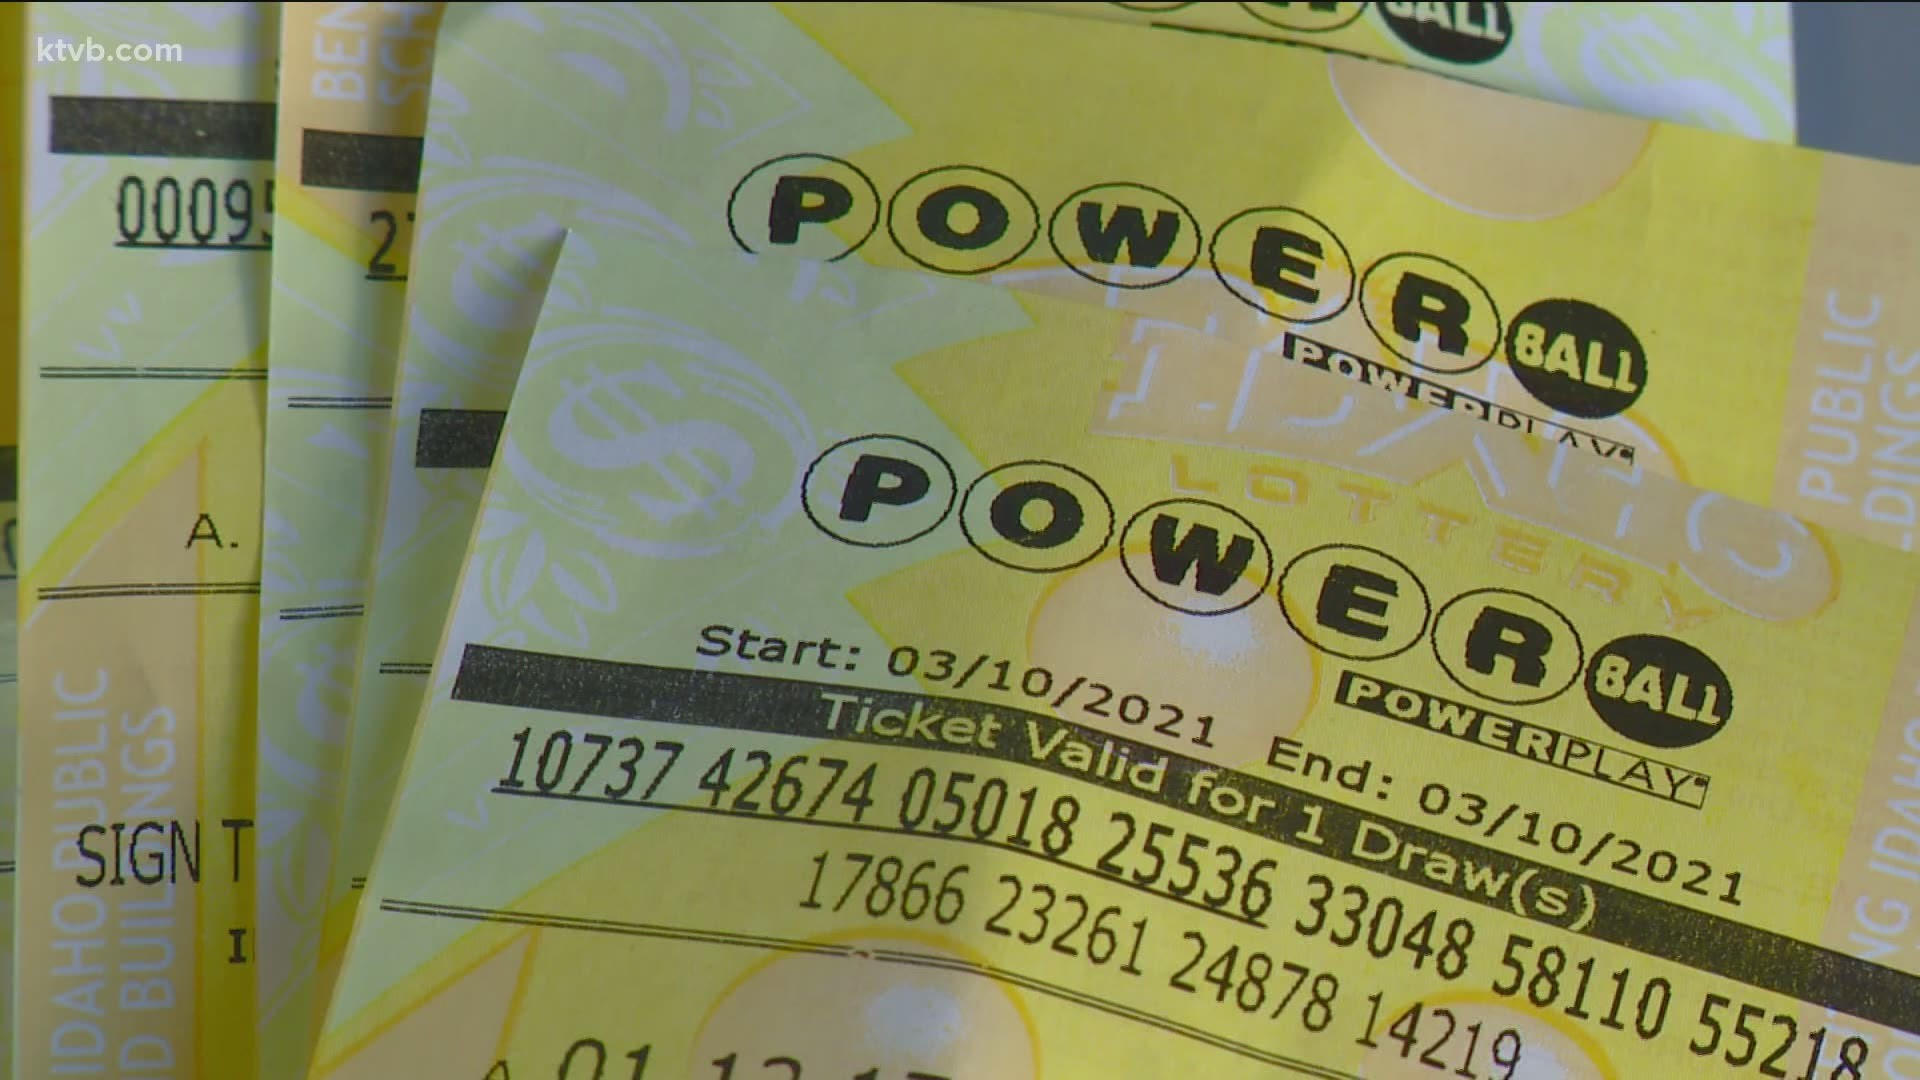 At issus is whether the Idaho Lottery would continue participating in Powerball after the Multi-State Lottery Association approved licensing in Australia and the UK.